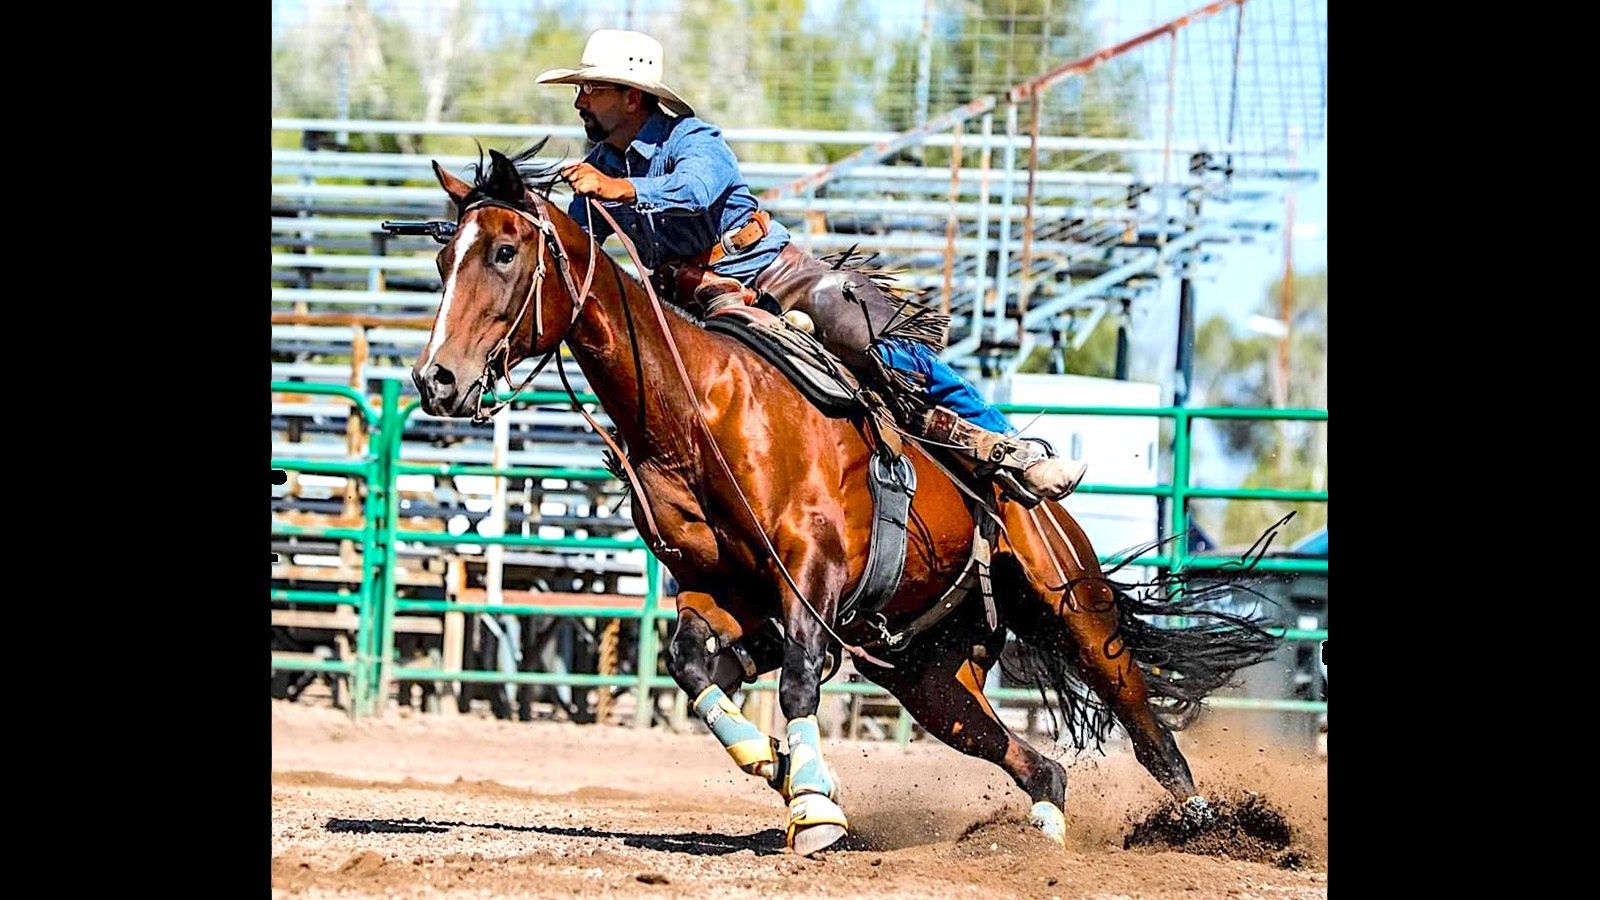 Mark Urlacher of Powell is a Level 4 cowboy mounted shooter. In competition, he rides his 19-year-old quarter horse, Lucy.